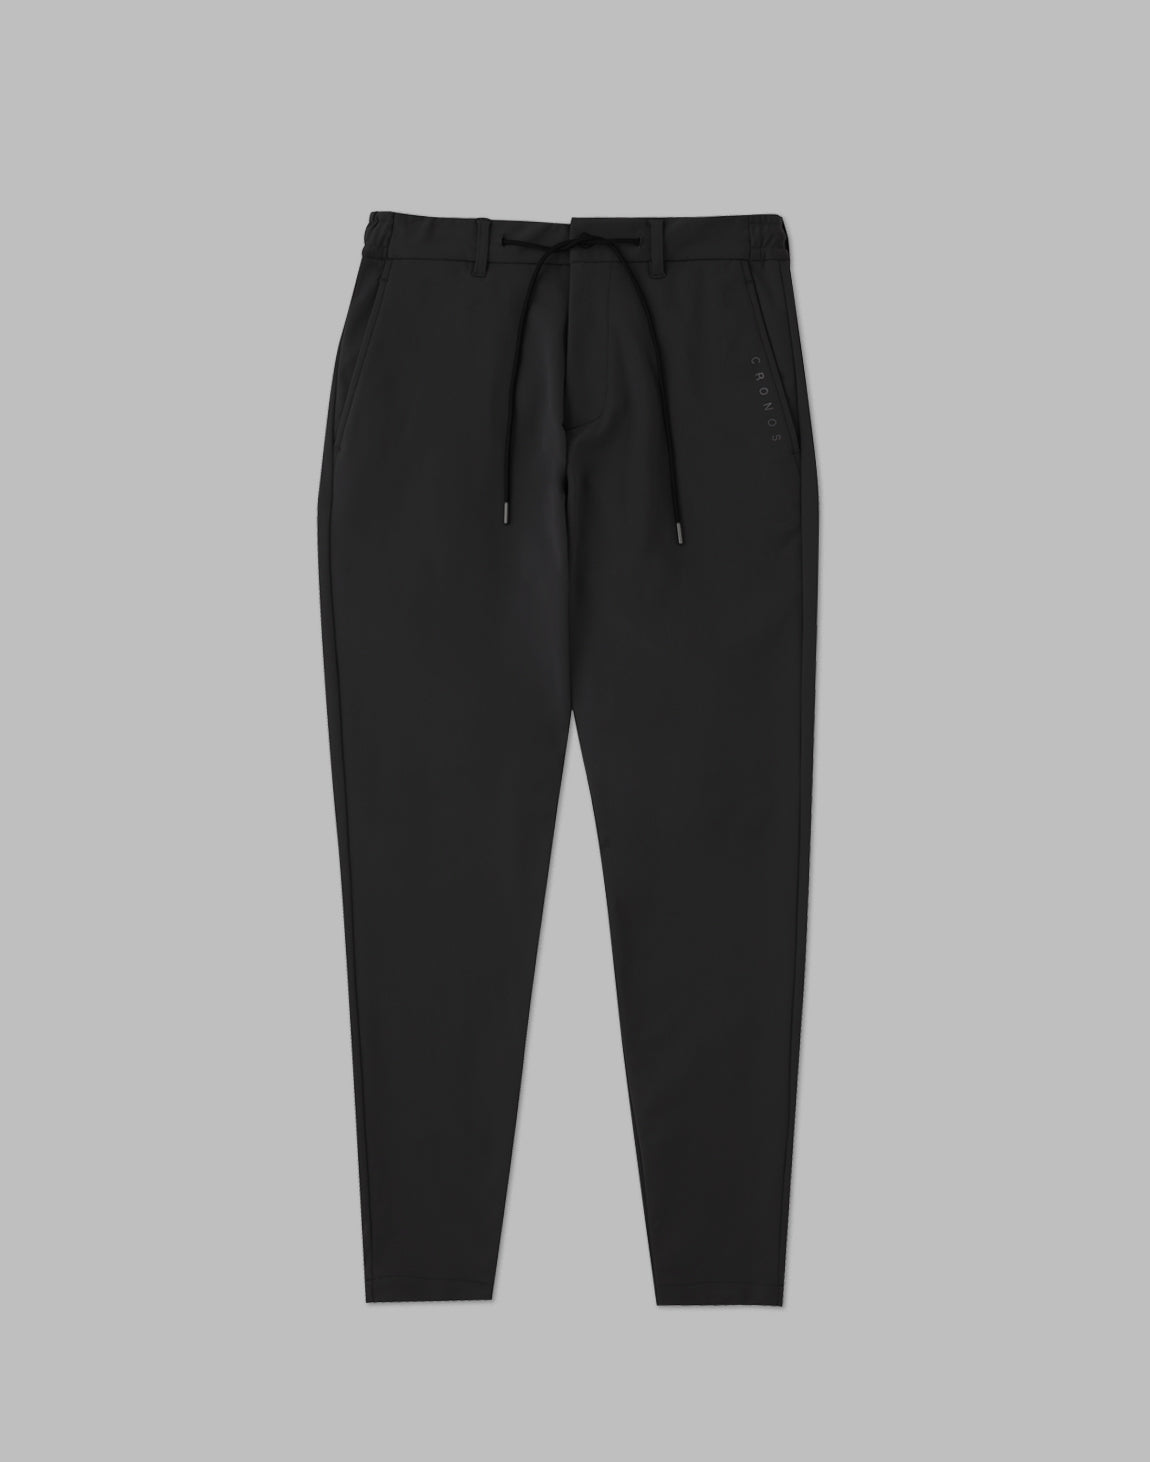 CRONOS BLACK STRETCH TAPERED PANTS – クロノス CRONOS Official Store